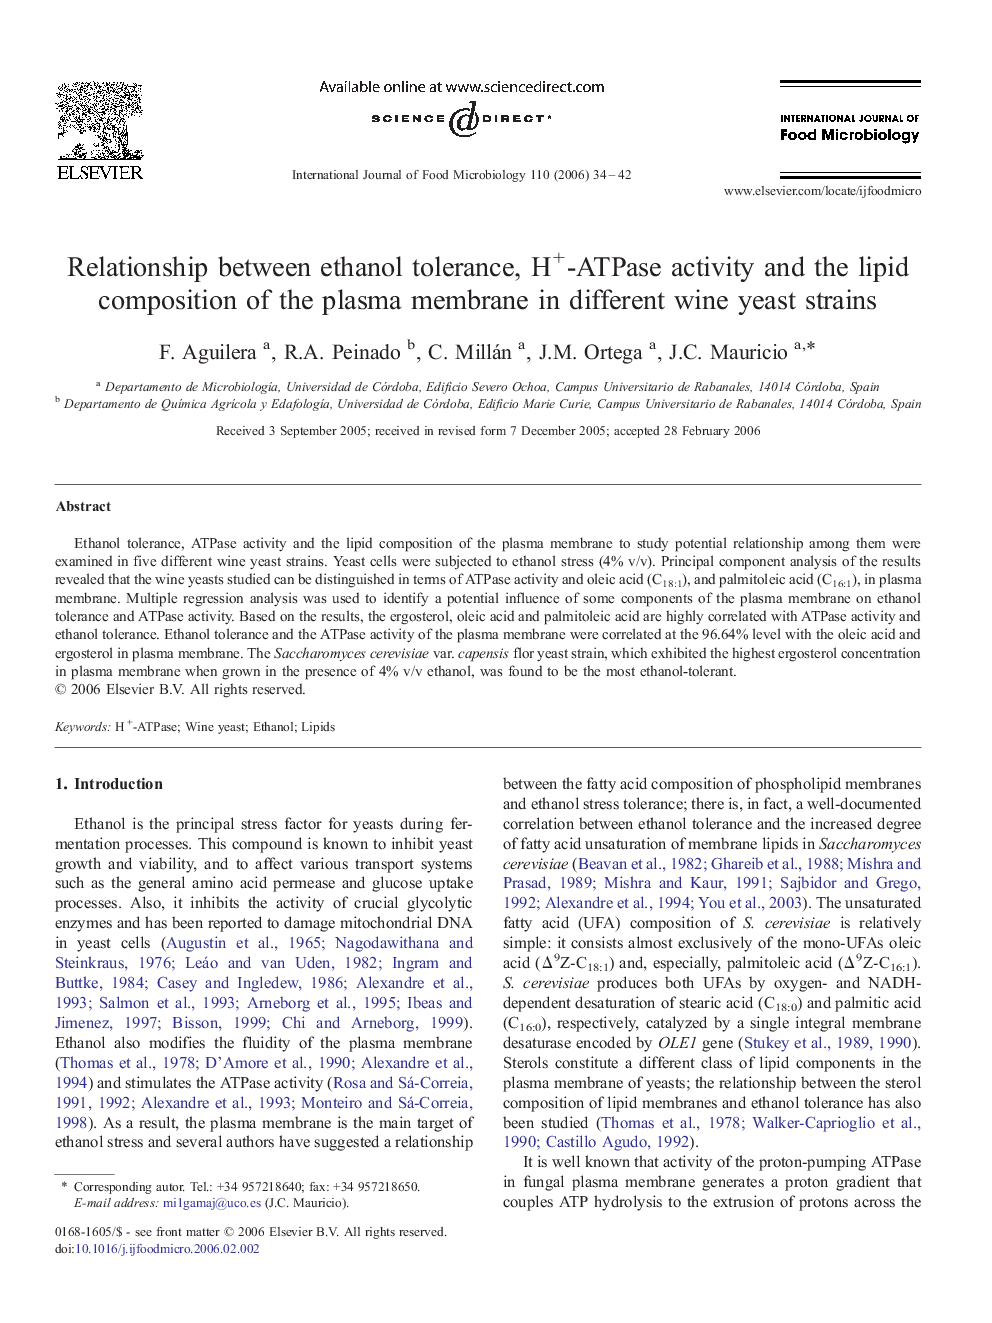 Relationship between ethanol tolerance, H+-ATPase activity and the lipid composition of the plasma membrane in different wine yeast strains